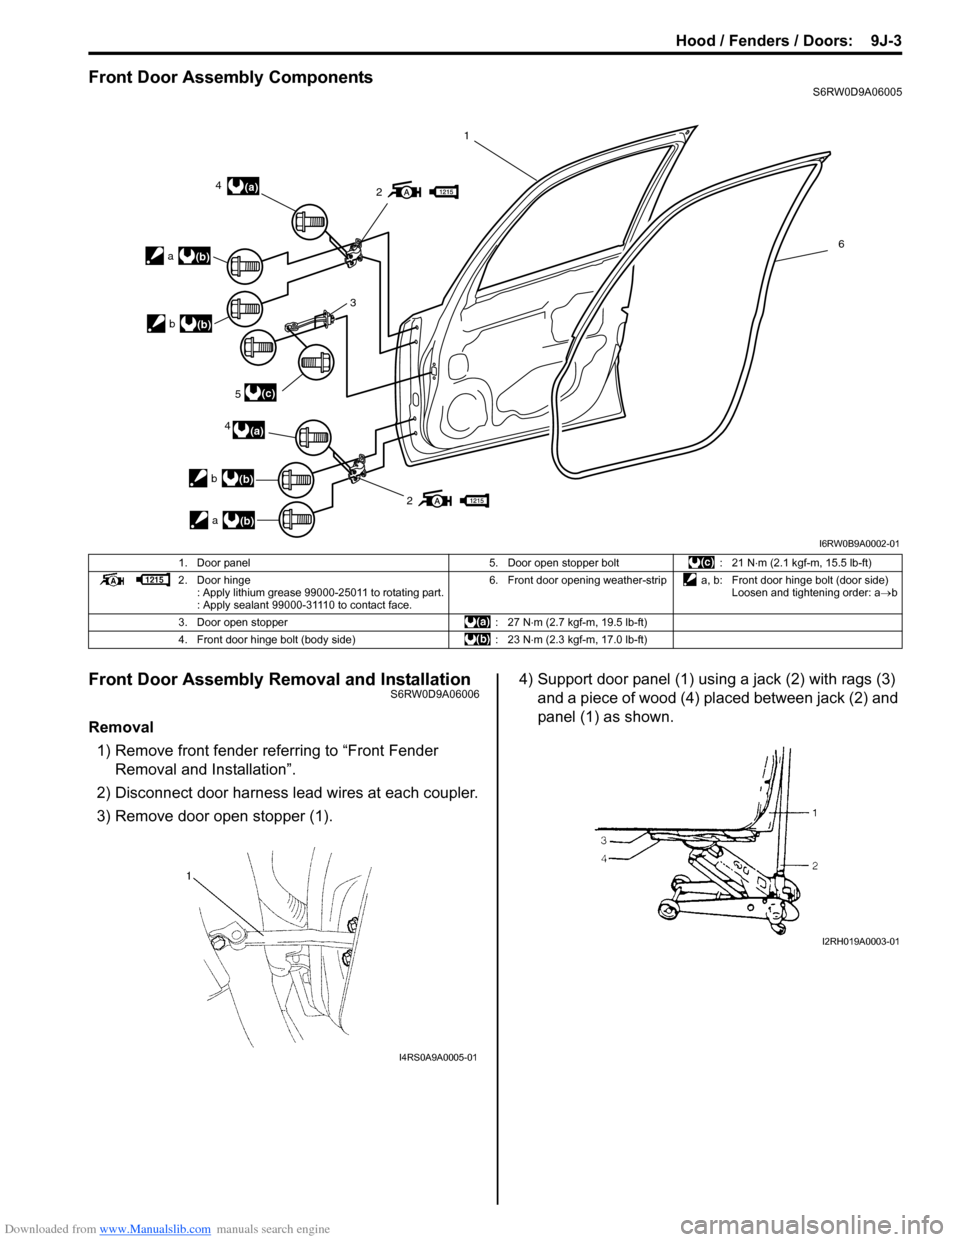 SUZUKI SX4 2006 1.G Service Workshop Manual Downloaded from www.Manualslib.com manuals search engine Hood / Fenders / Doors:  9J-3
Front Door Assembly ComponentsS6RW0D9A06005
Front Door Assembly Removal and InstallationS6RW0D9A06006
Removal
1) 